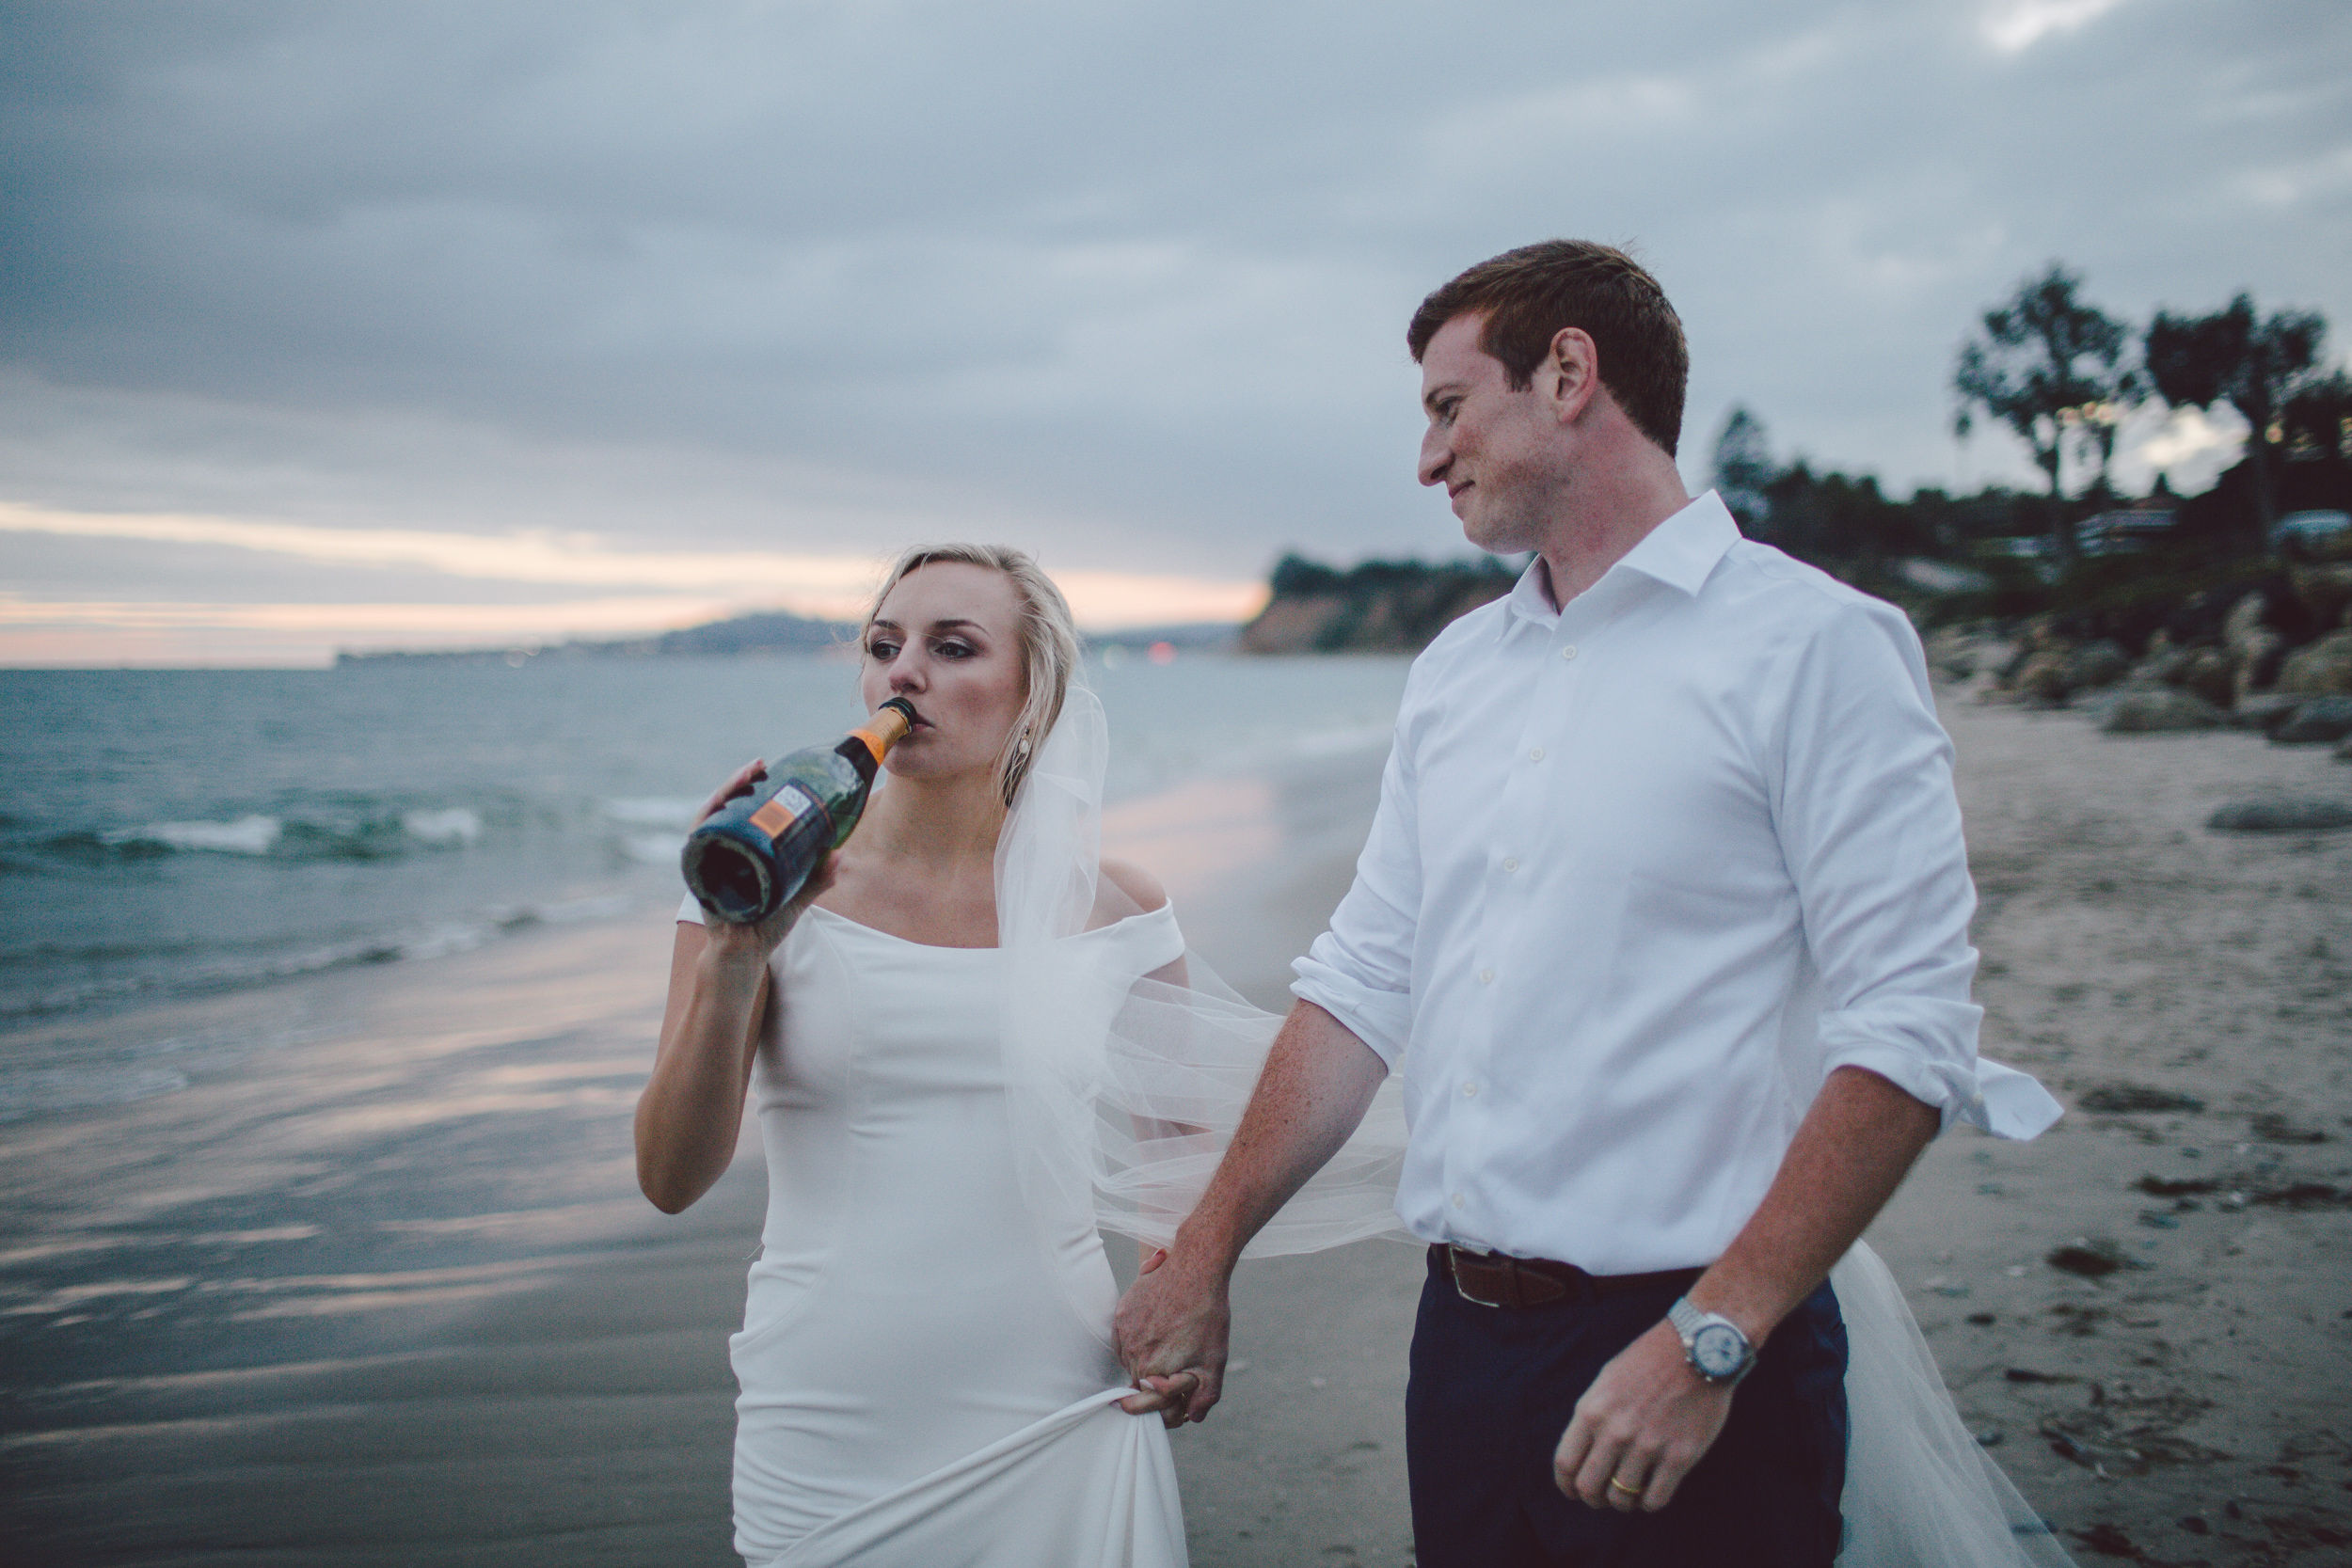 A couple walk along a beach as one of them drinks from a champagne bottle